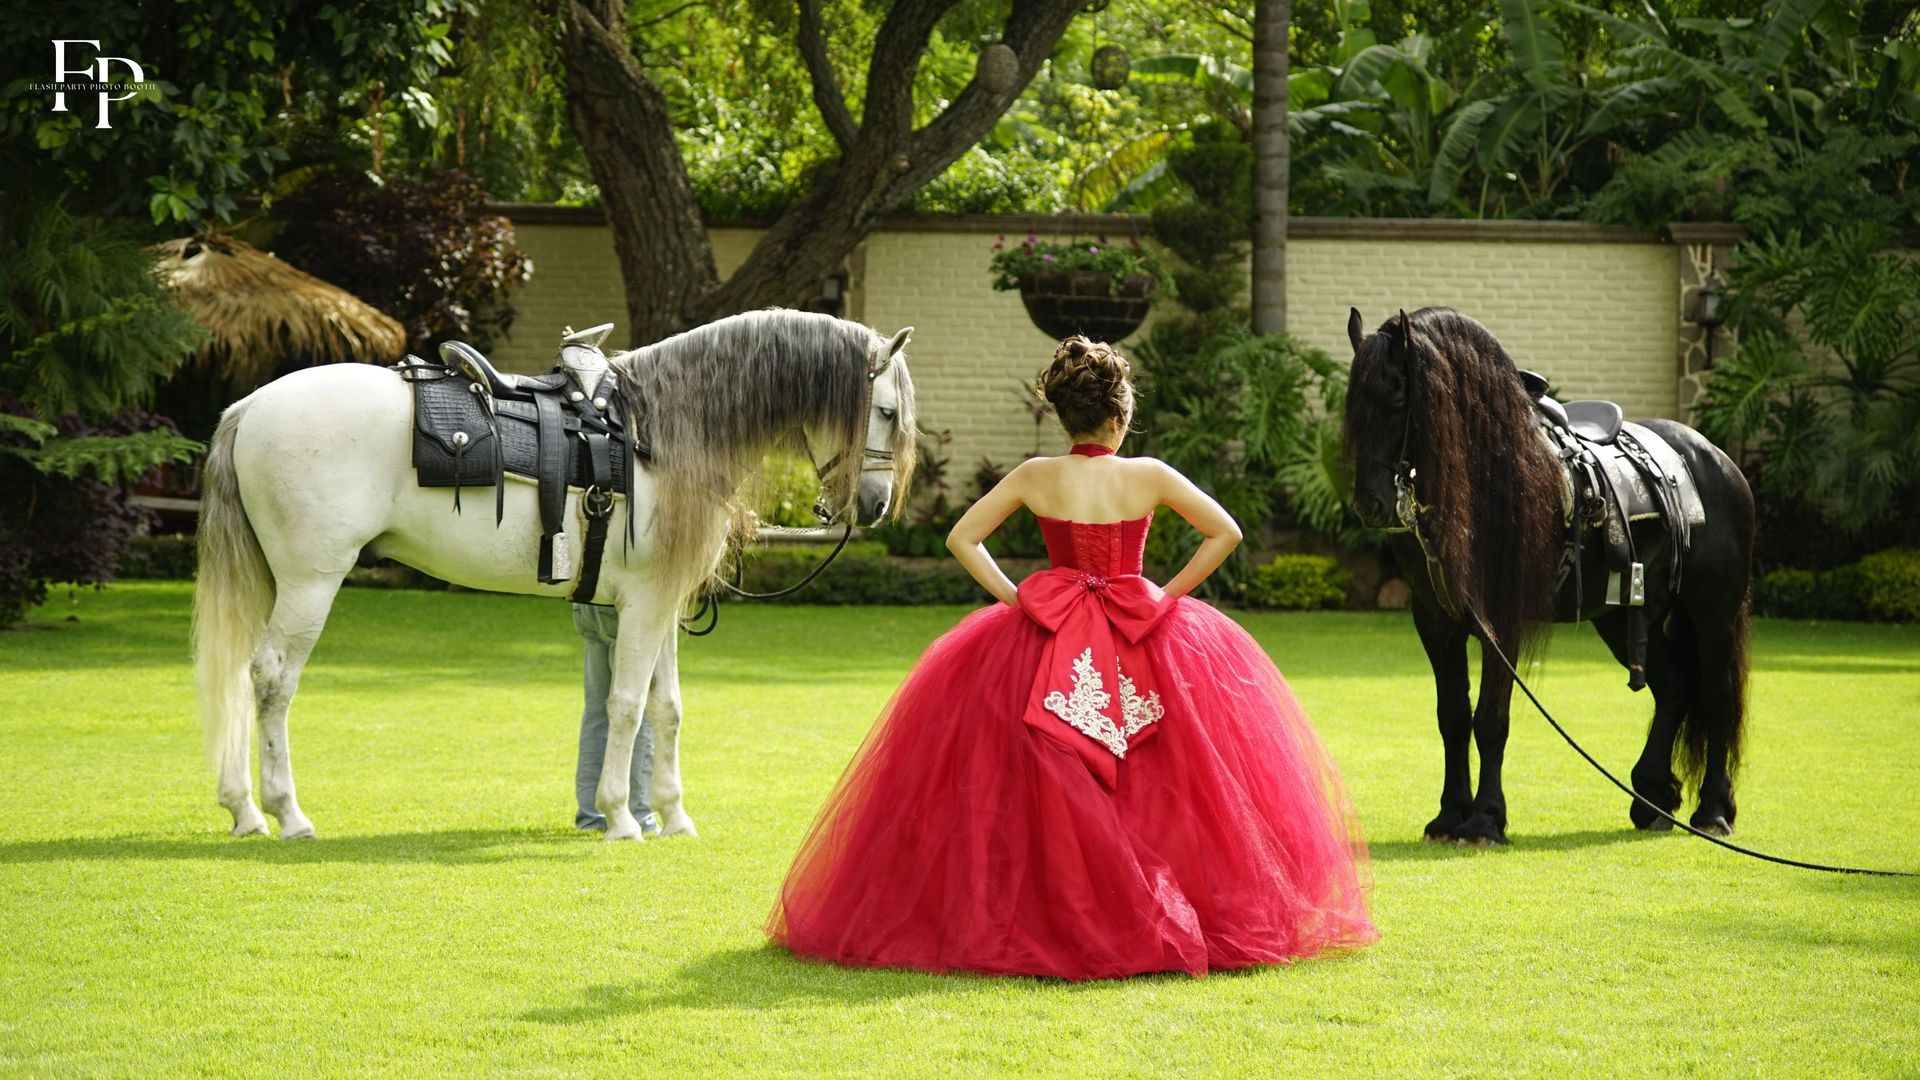 A celebrant in a stunning red gown striking a pose with horses for a photo shoot for her quinceanera